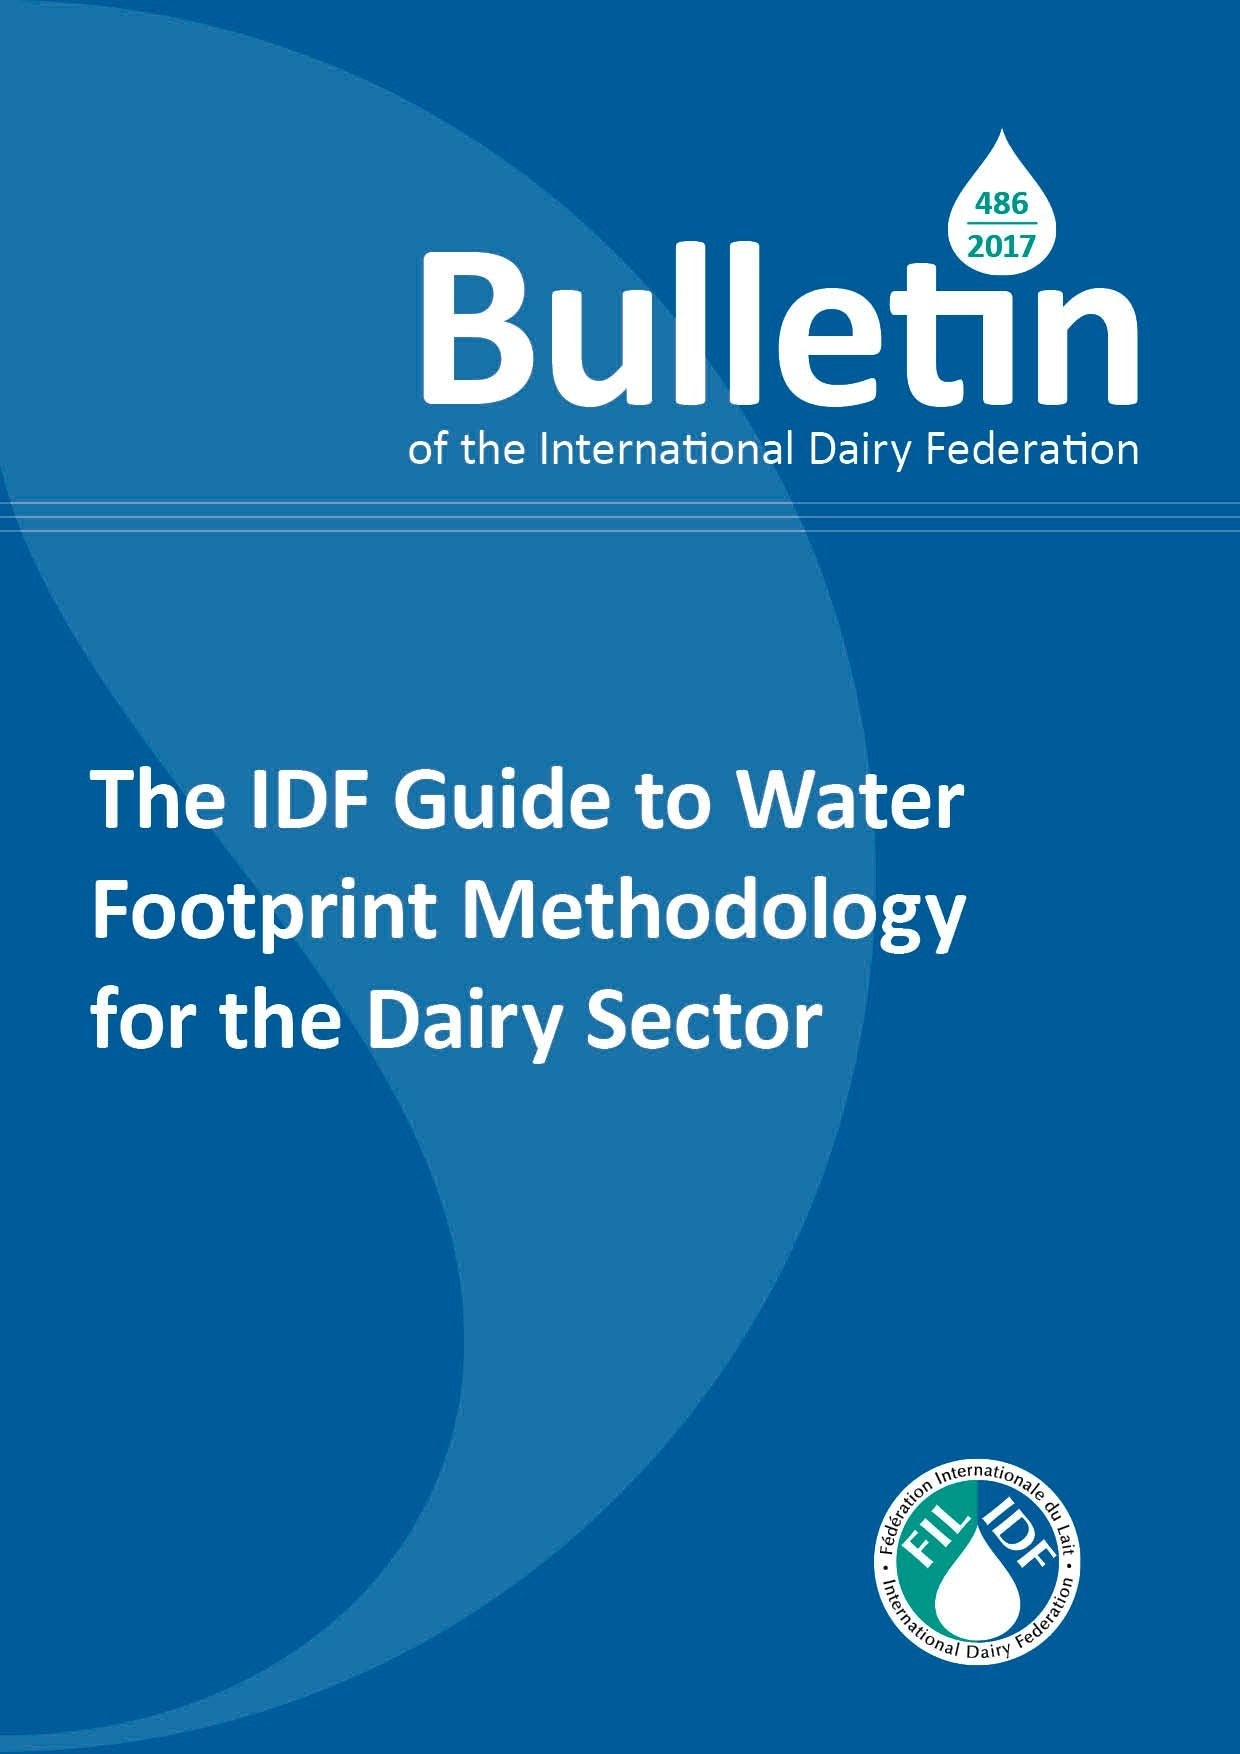 Bulletin of the IDF N° 486/2017: The IDF Guide to Water Footprint Methodology for the Dairy Sector (in Polish) - FIL-IDF